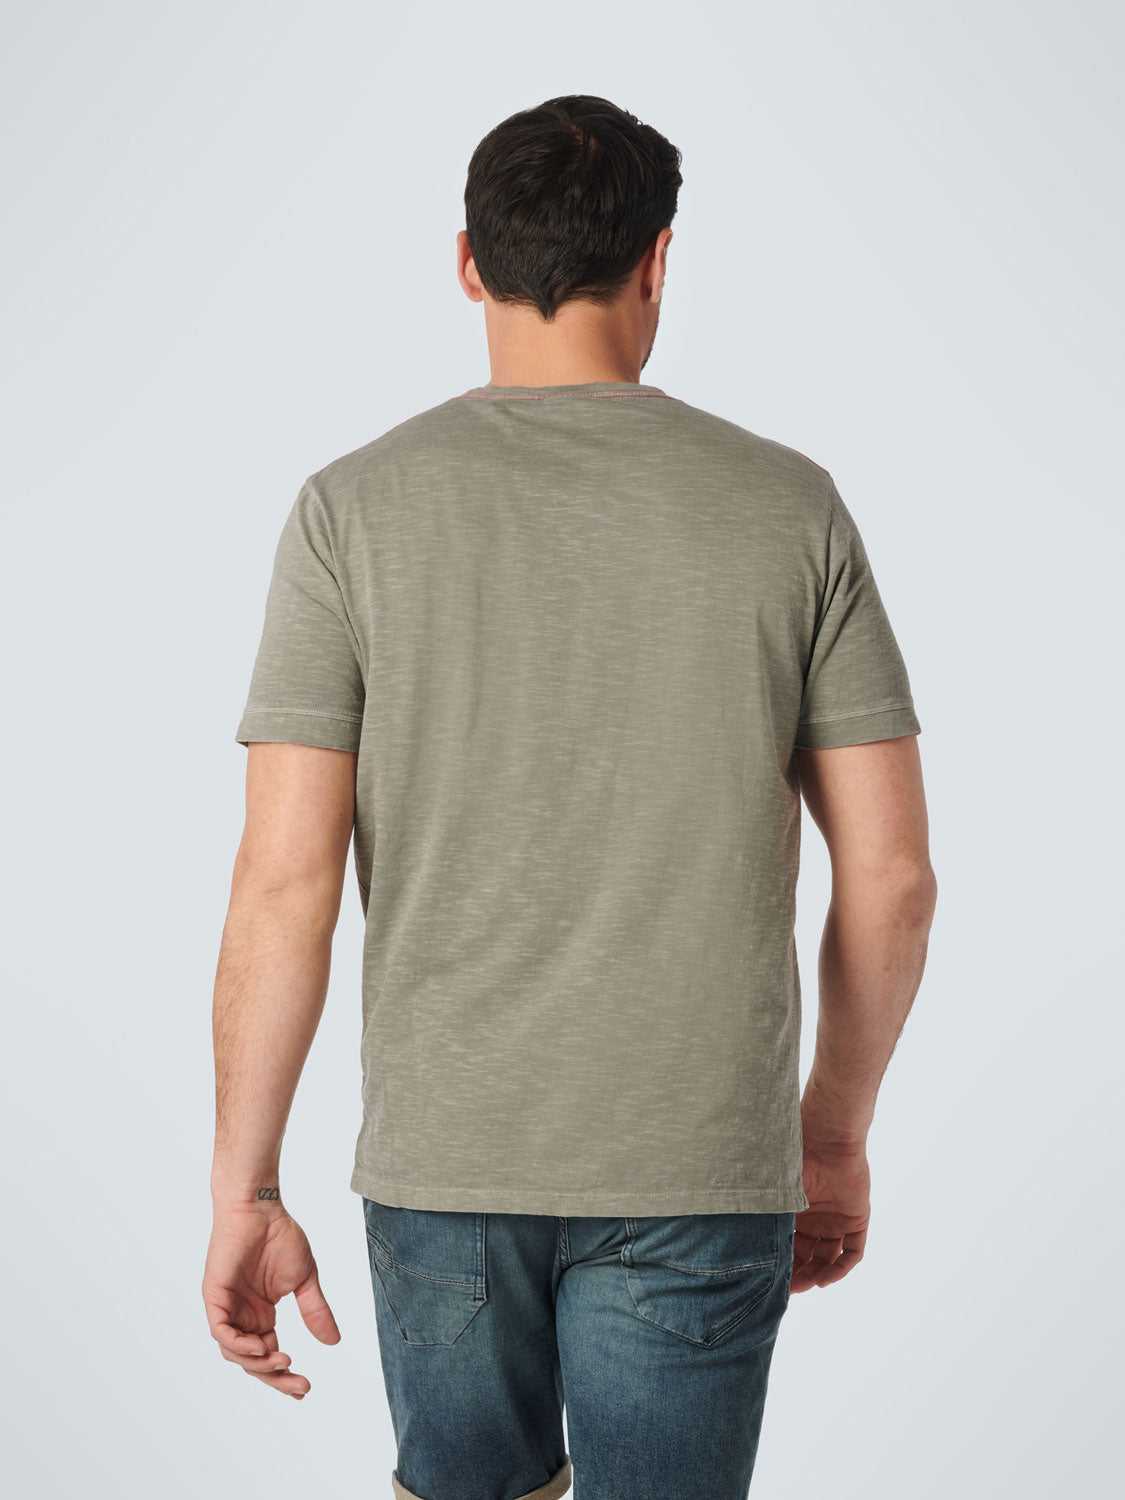 No Excess - Dyed Print T-Shirt - Cream or Light Army Green